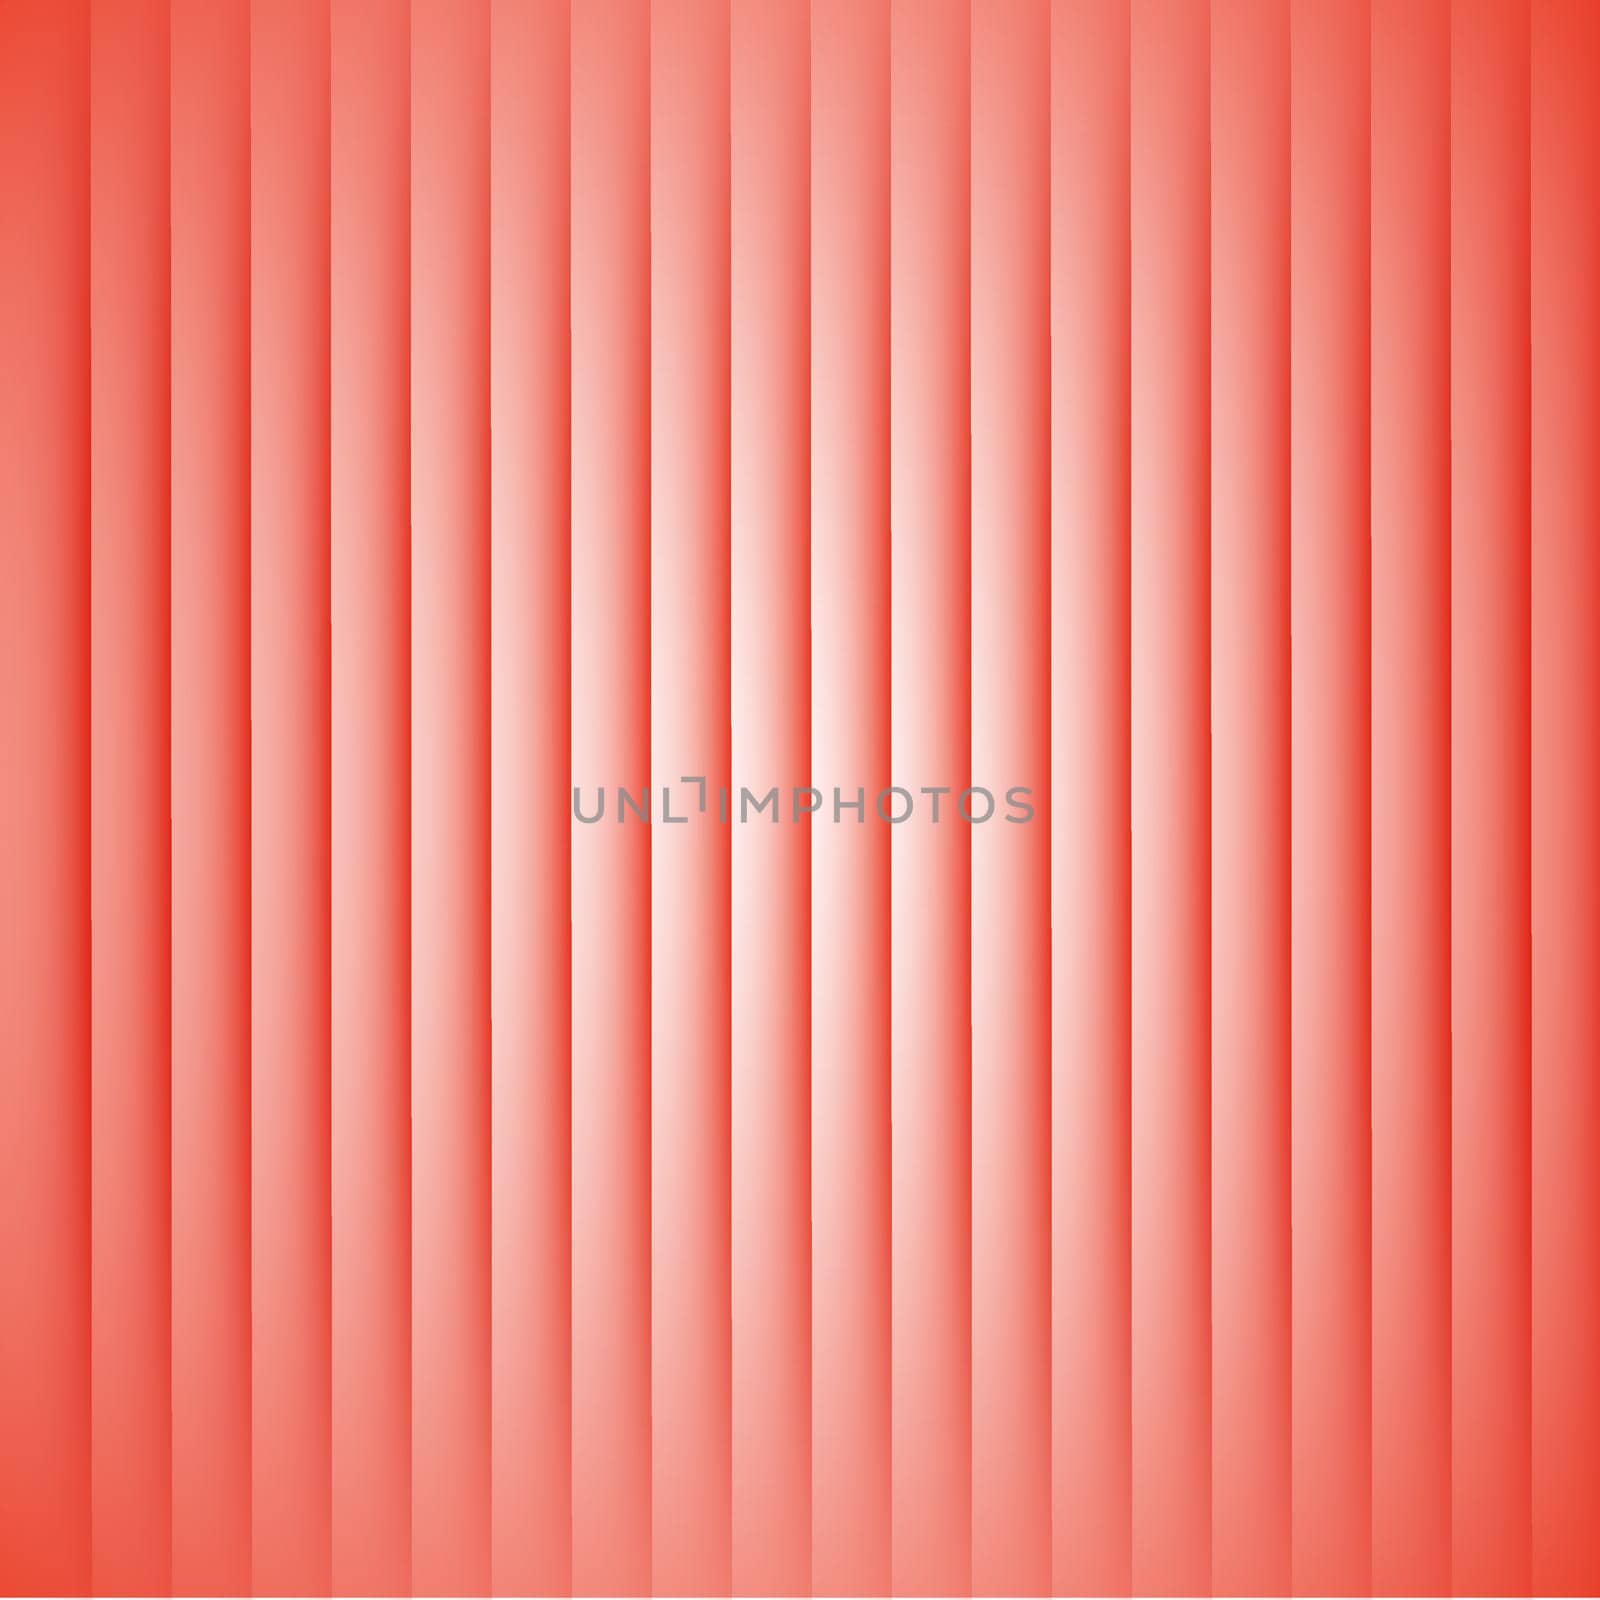 abstract red stripes on a white background by Haisonok